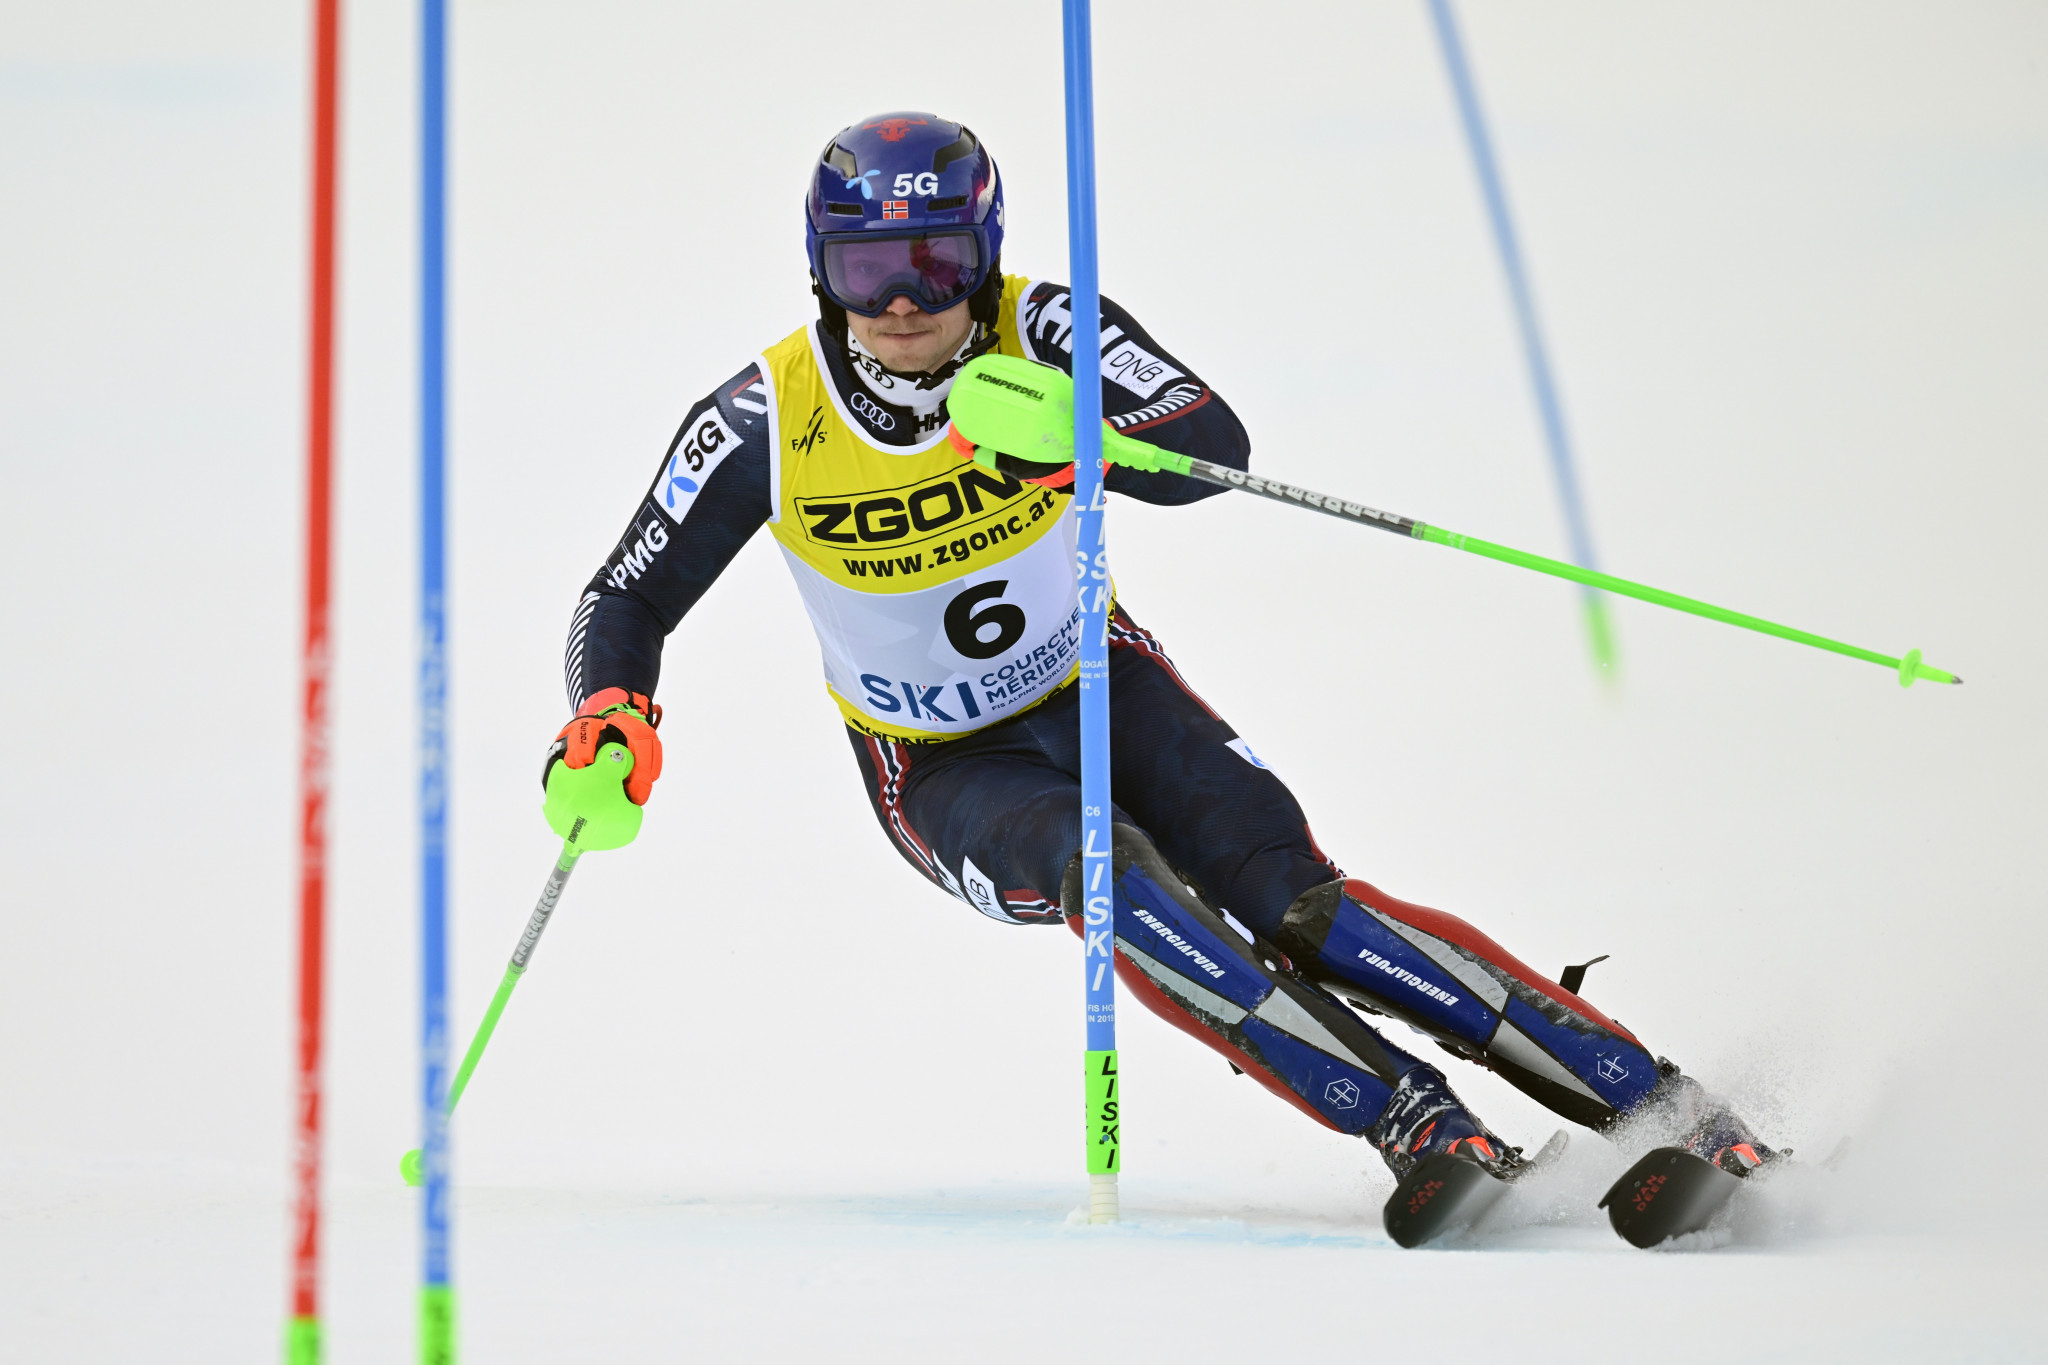 Henrik Kristoffersen of Norway climbed from 16th to first after a superb second run of the men's slalom competition in Courchevel ©Getty Images